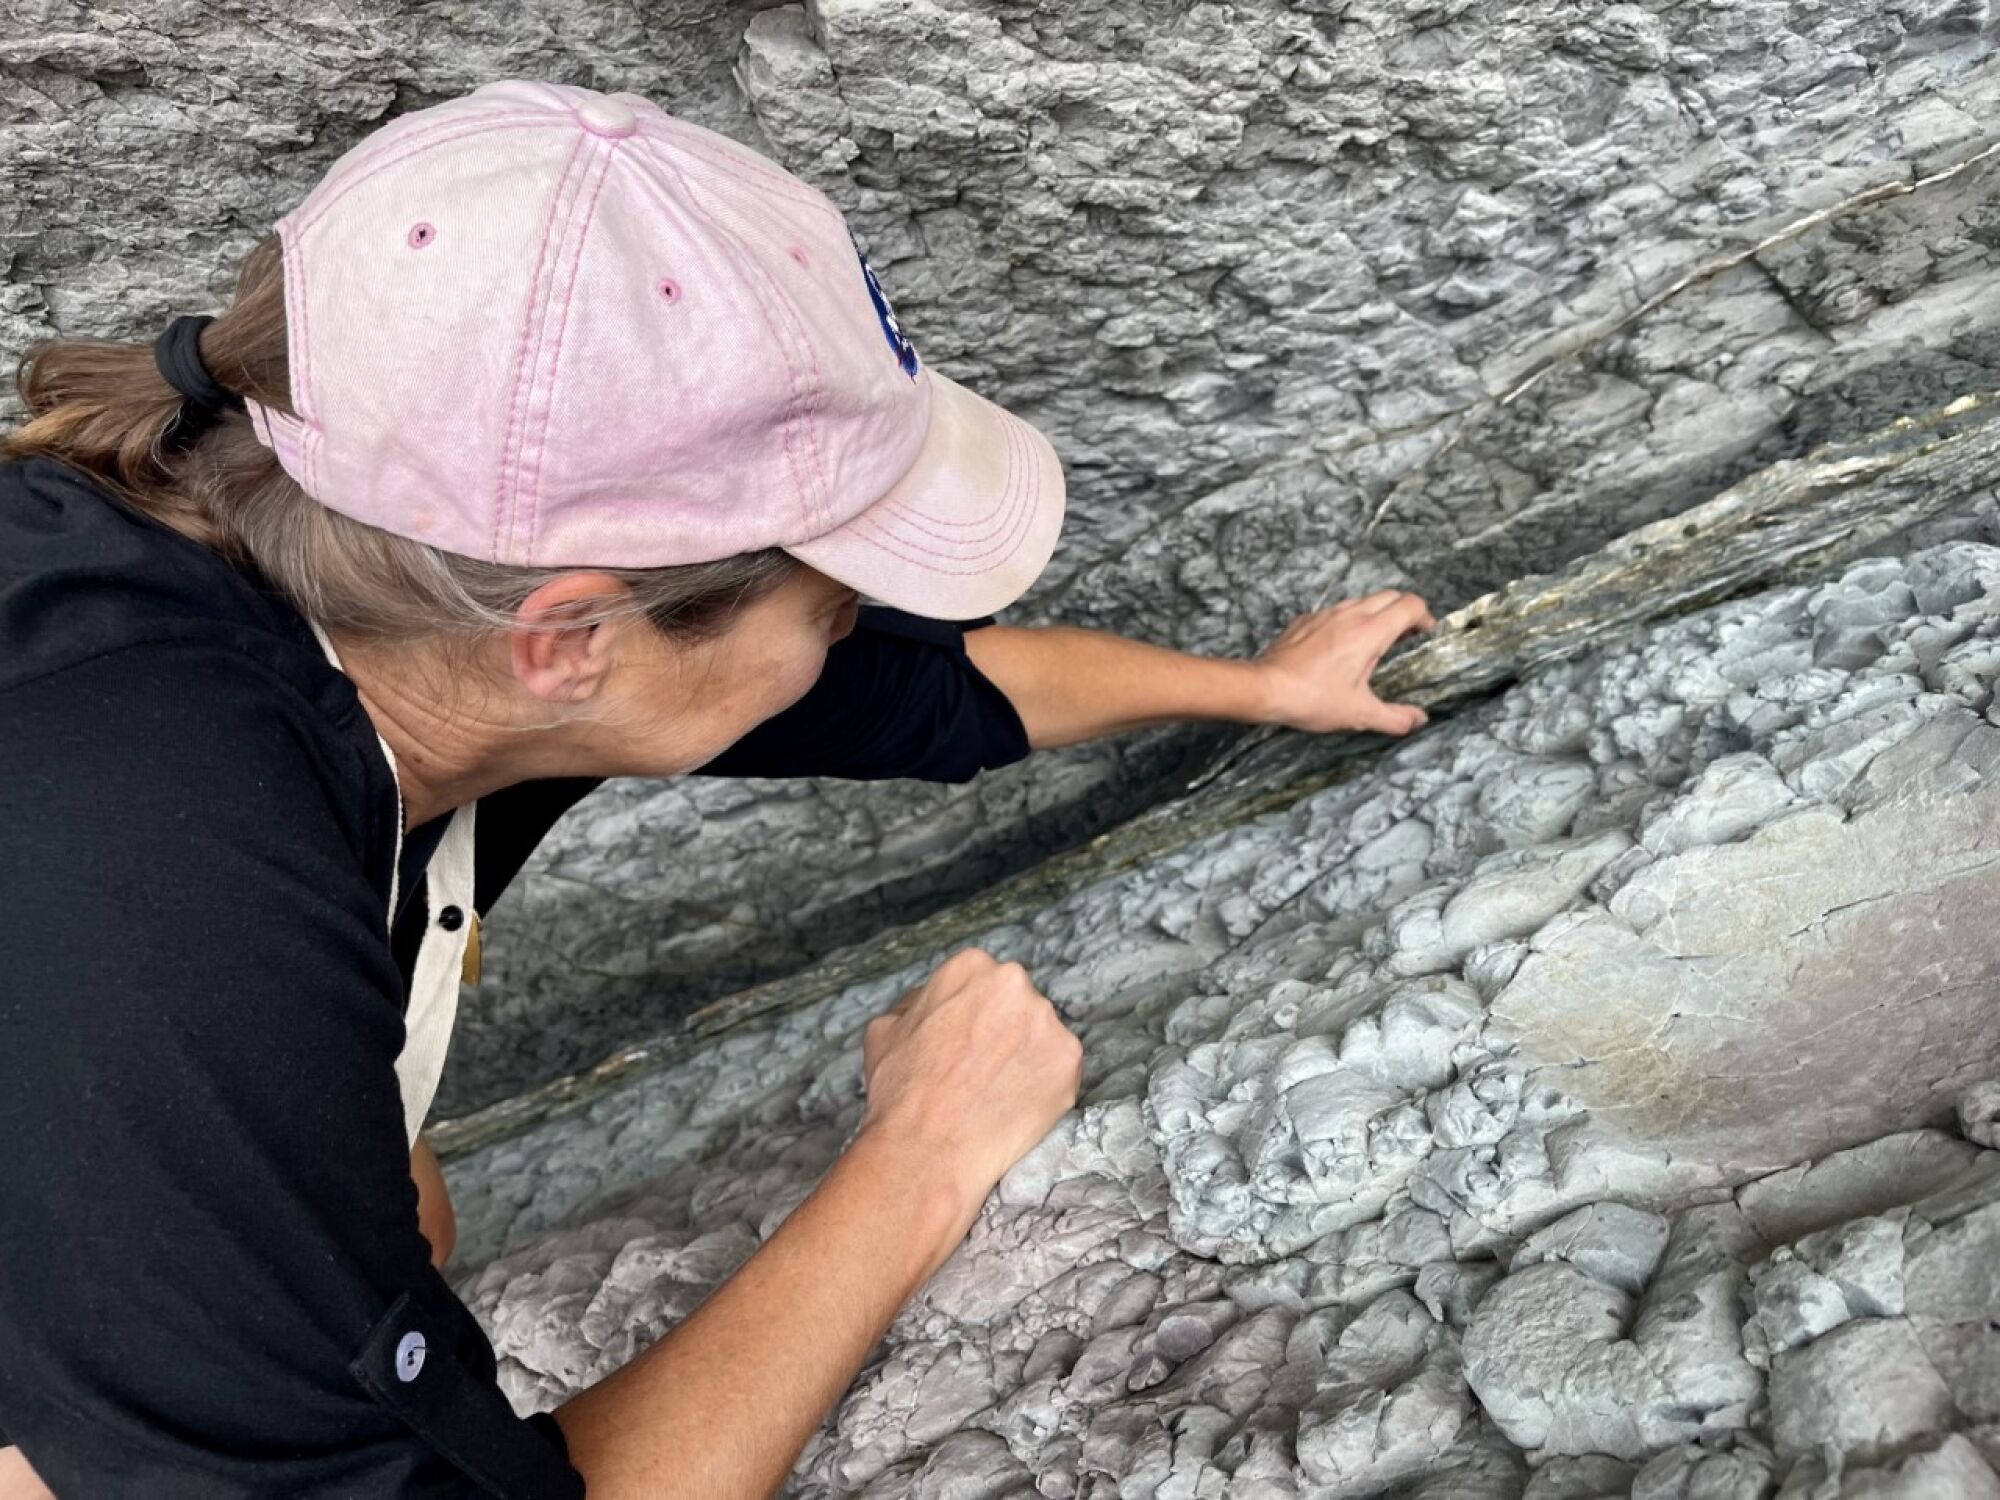 La Brea Tar Pits curator Regan Dunn places her hand on the K-Pg boundary of Zumaia’s flysch in Zumaia, Spain.